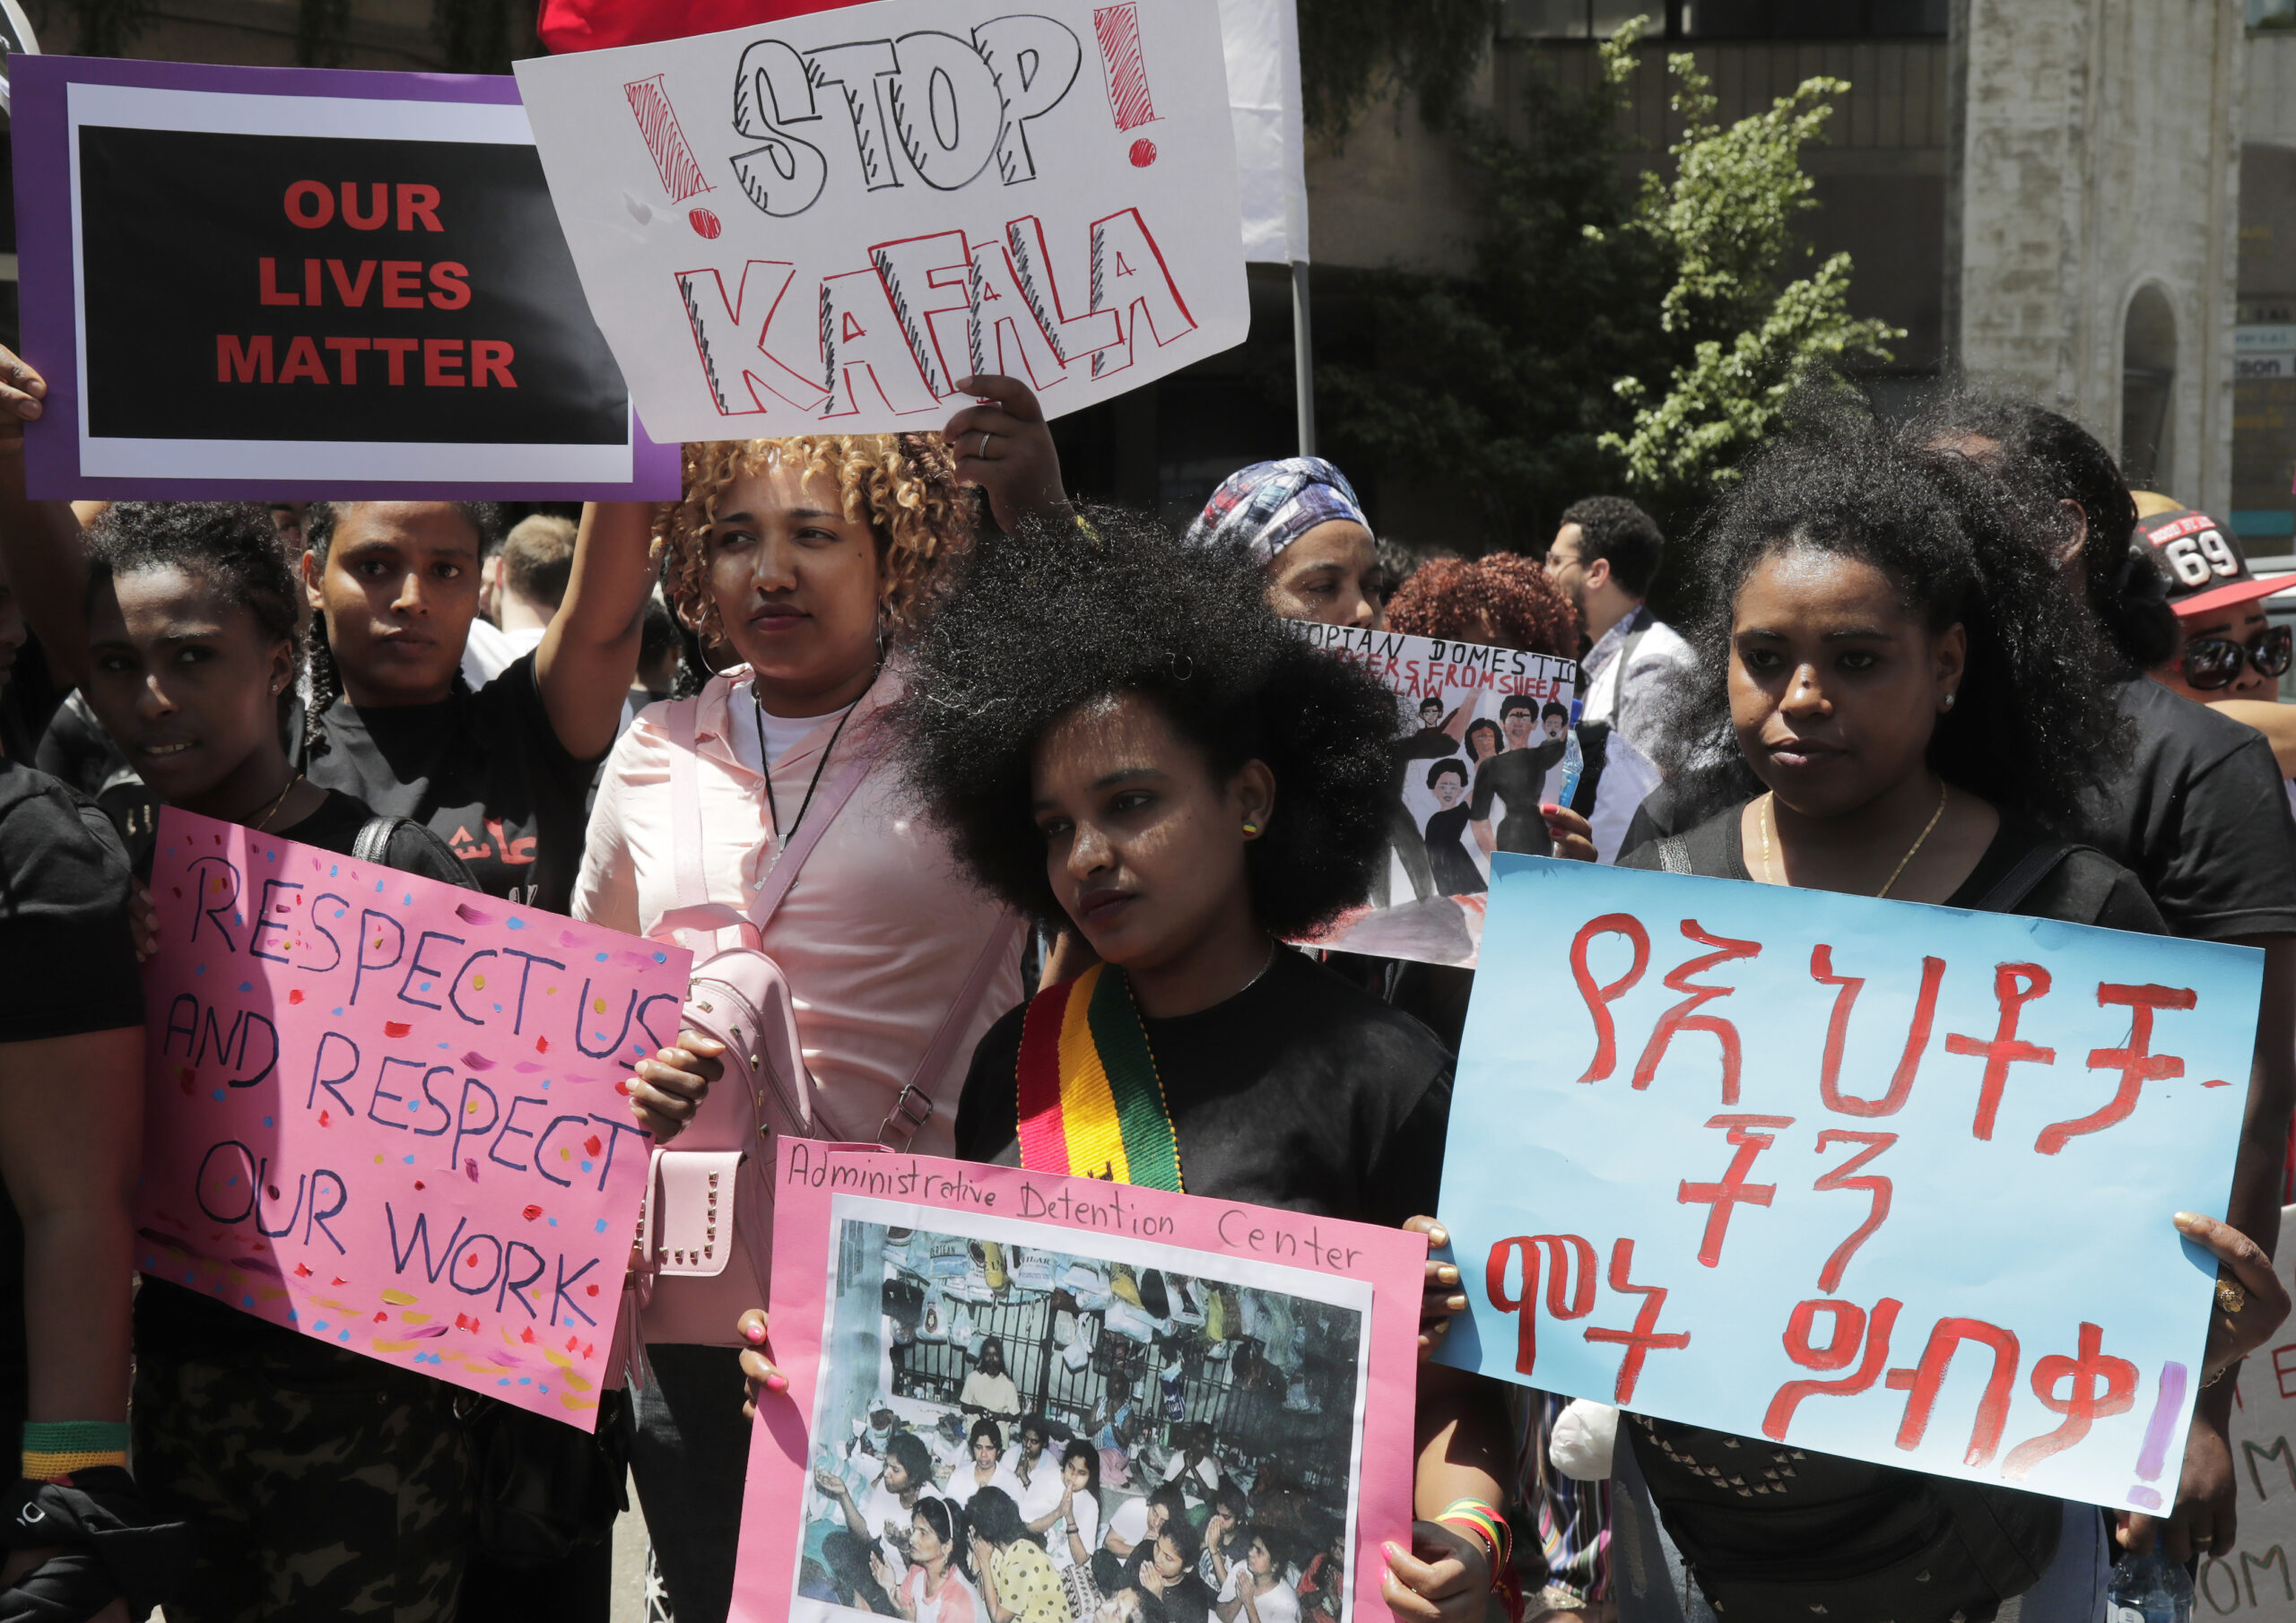 Migrant domestic workers carry placards during a protest in the Lebanese capital Beirut on May 5, 2019, to call for the abolishment of the sponsorship (kafala) system and for the inclusion of domestic workers in Lebanese labour laws. - Domestic workers in Lebanon, which hosts more than 250,000 registered domestic workers from countries in Africa and Asia, are excluded from the labour law. They instead obtain legal residency though their employers' sponsorship under the so-called "kafala" system. (Photo by ANWAR AMRO / AFP)